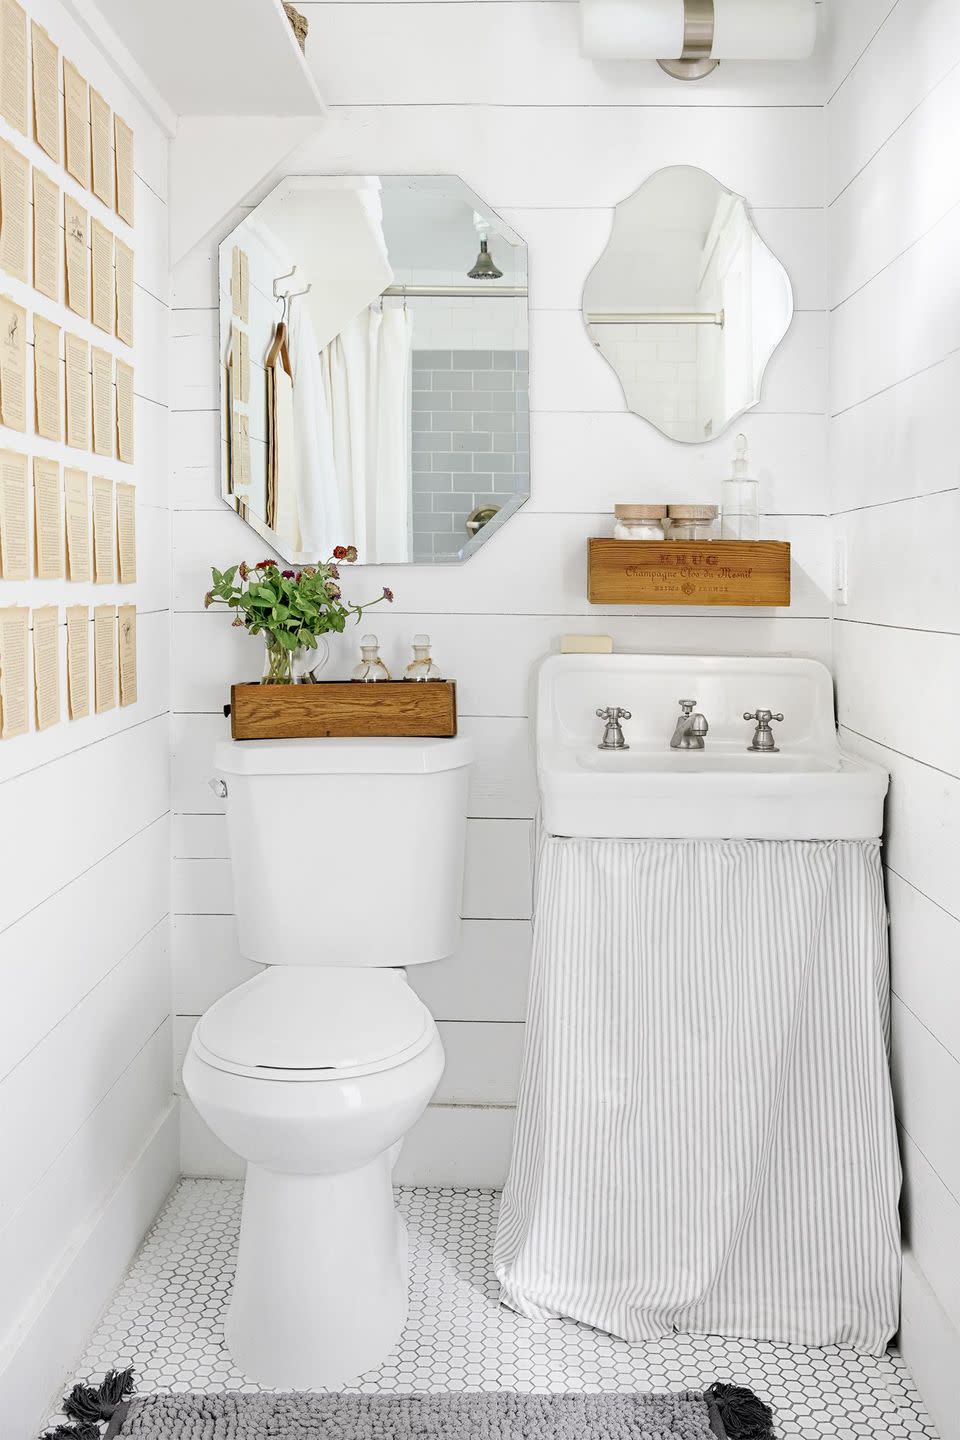 small all white bathroom with hexagon tile floor, shiplap walls, skirted vintage sink, gray subway tile walls in shower